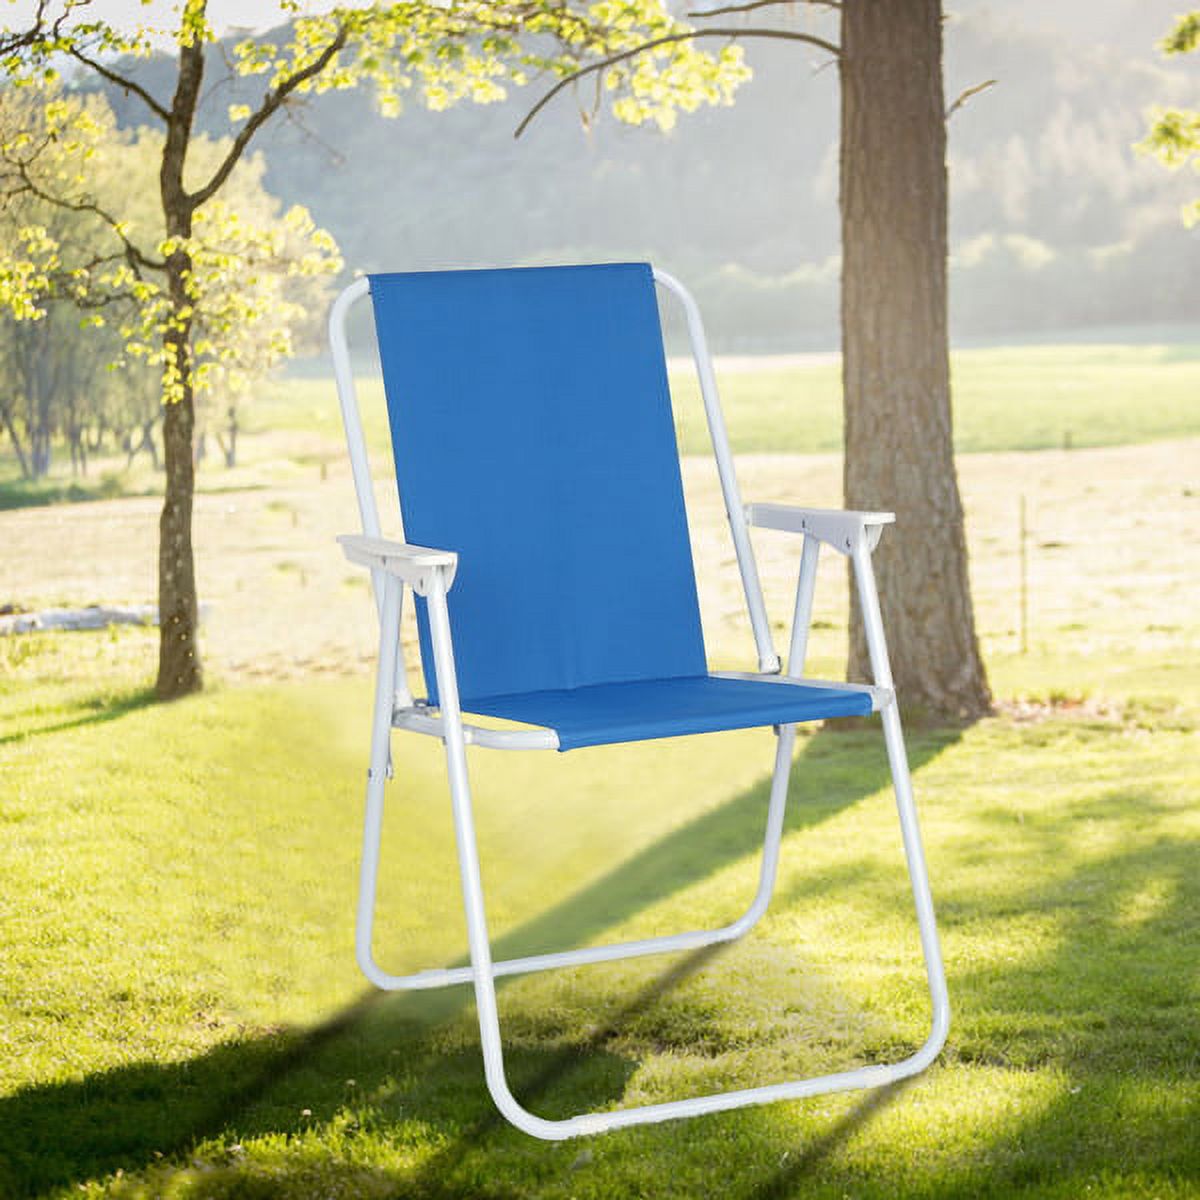 Folding Chair, Portable Patio Chair, Patio Dining Chairs, Stackable Storage Lawn/Camping Chair- Blue - image 5 of 8